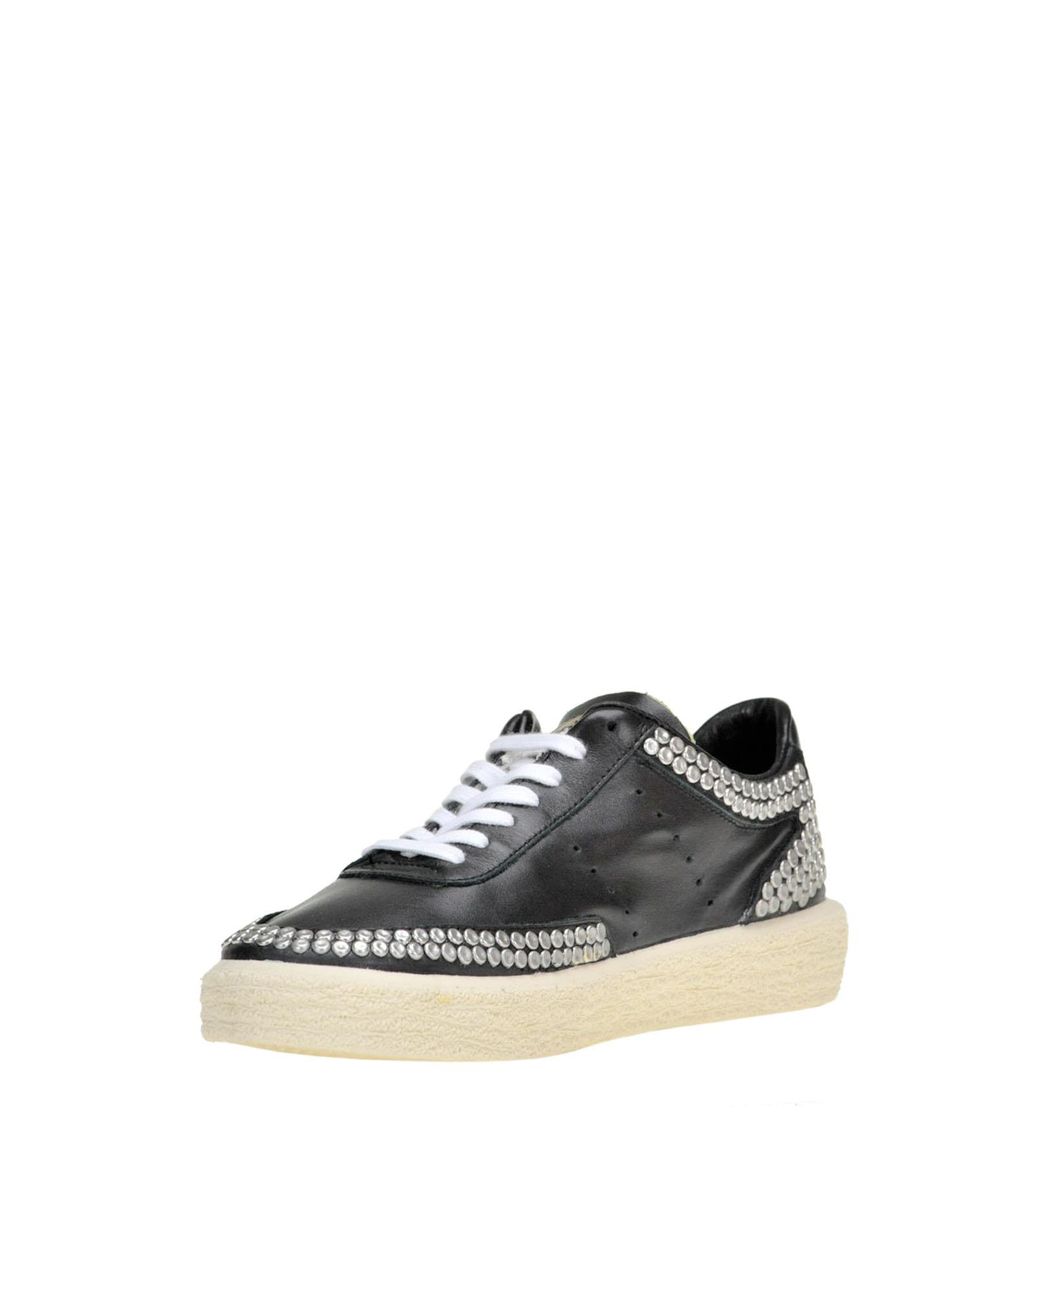 Golden Goose Deluxe Brand Women's Black The Tenth Star Studded Trainers On  sale